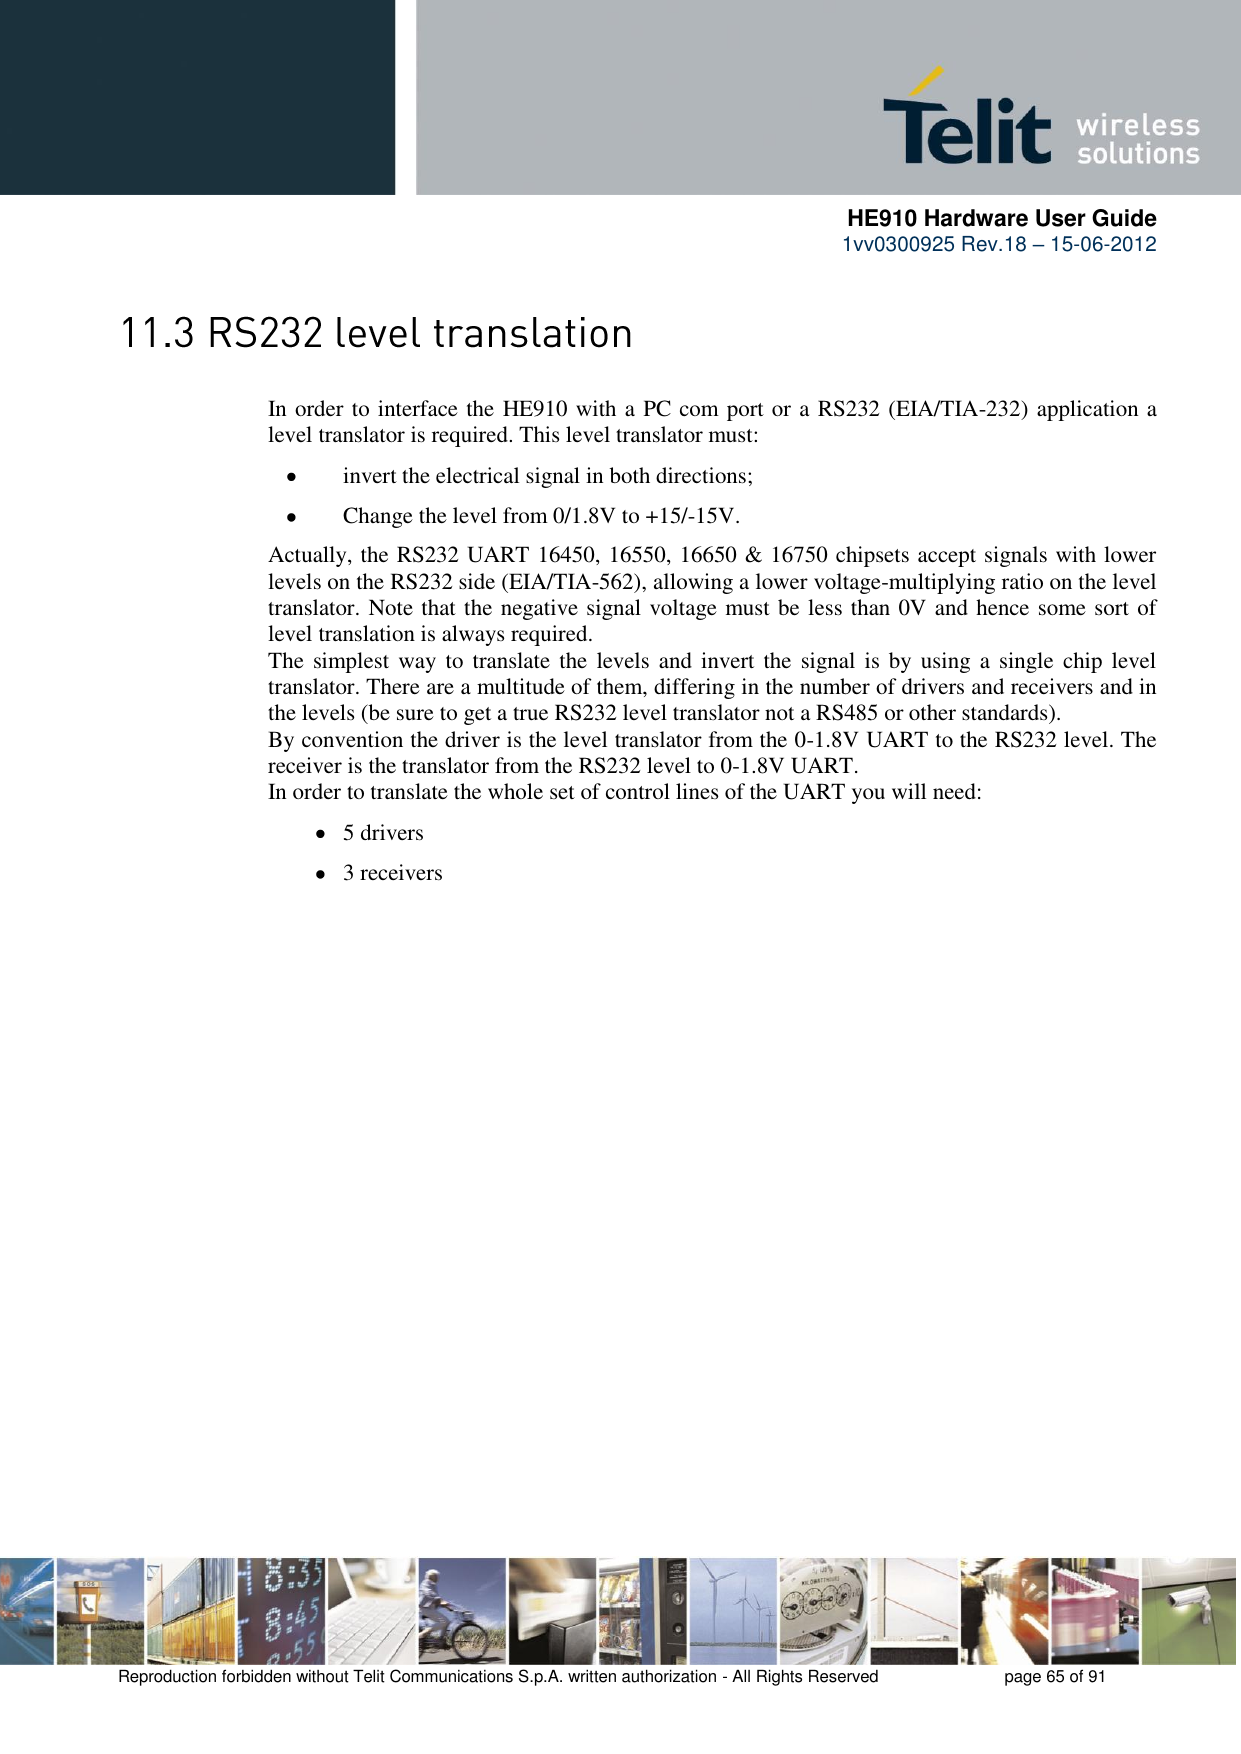      HE910 Hardware User Guide 1vv0300925 Rev.18 – 15-06-2012    Reproduction forbidden without Telit Communications S.p.A. written authorization - All Rights Reserved    page 65 of 91   In order to interface the HE910 with a PC com port or a RS232 (EIA/TIA-232) application a level translator is required. This level translator must:  invert the electrical signal in both directions;  Change the level from 0/1.8V to +15/-15V. Actually, the RS232 UART 16450, 16550, 16650 &amp; 16750 chipsets accept signals with lower levels on the RS232 side (EIA/TIA-562), allowing a lower voltage-multiplying ratio on the level translator. Note that the negative signal voltage must be less than 0V and hence some sort of level translation is always required.  The simplest way  to  translate the  levels and invert the  signal is  by  using  a  single  chip level translator. There are a multitude of them, differing in the number of drivers and receivers and in the levels (be sure to get a true RS232 level translator not a RS485 or other standards). By convention the driver is the level translator from the 0-1.8V UART to the RS232 level. The receiver is the translator from the RS232 level to 0-1.8V UART. In order to translate the whole set of control lines of the UART you will need:  5 drivers  3 receivers 